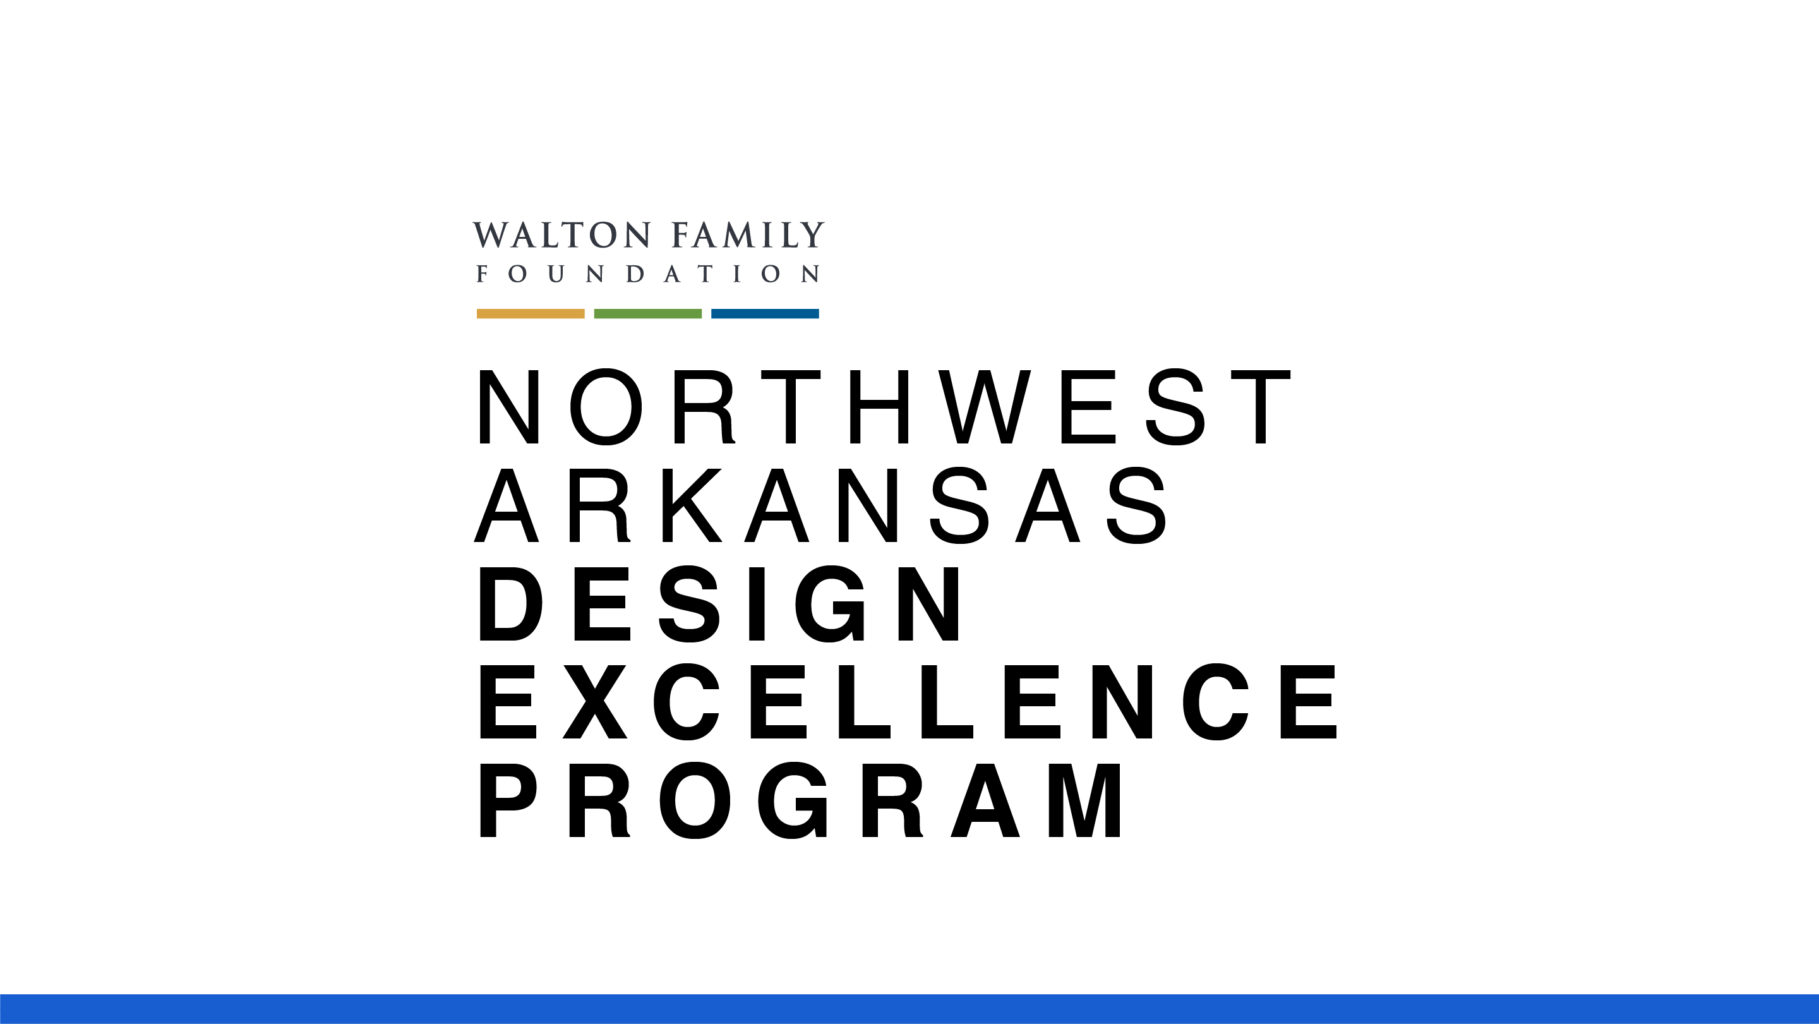 MMD Selected for Walton Family Foundation’s Design Excellence Program